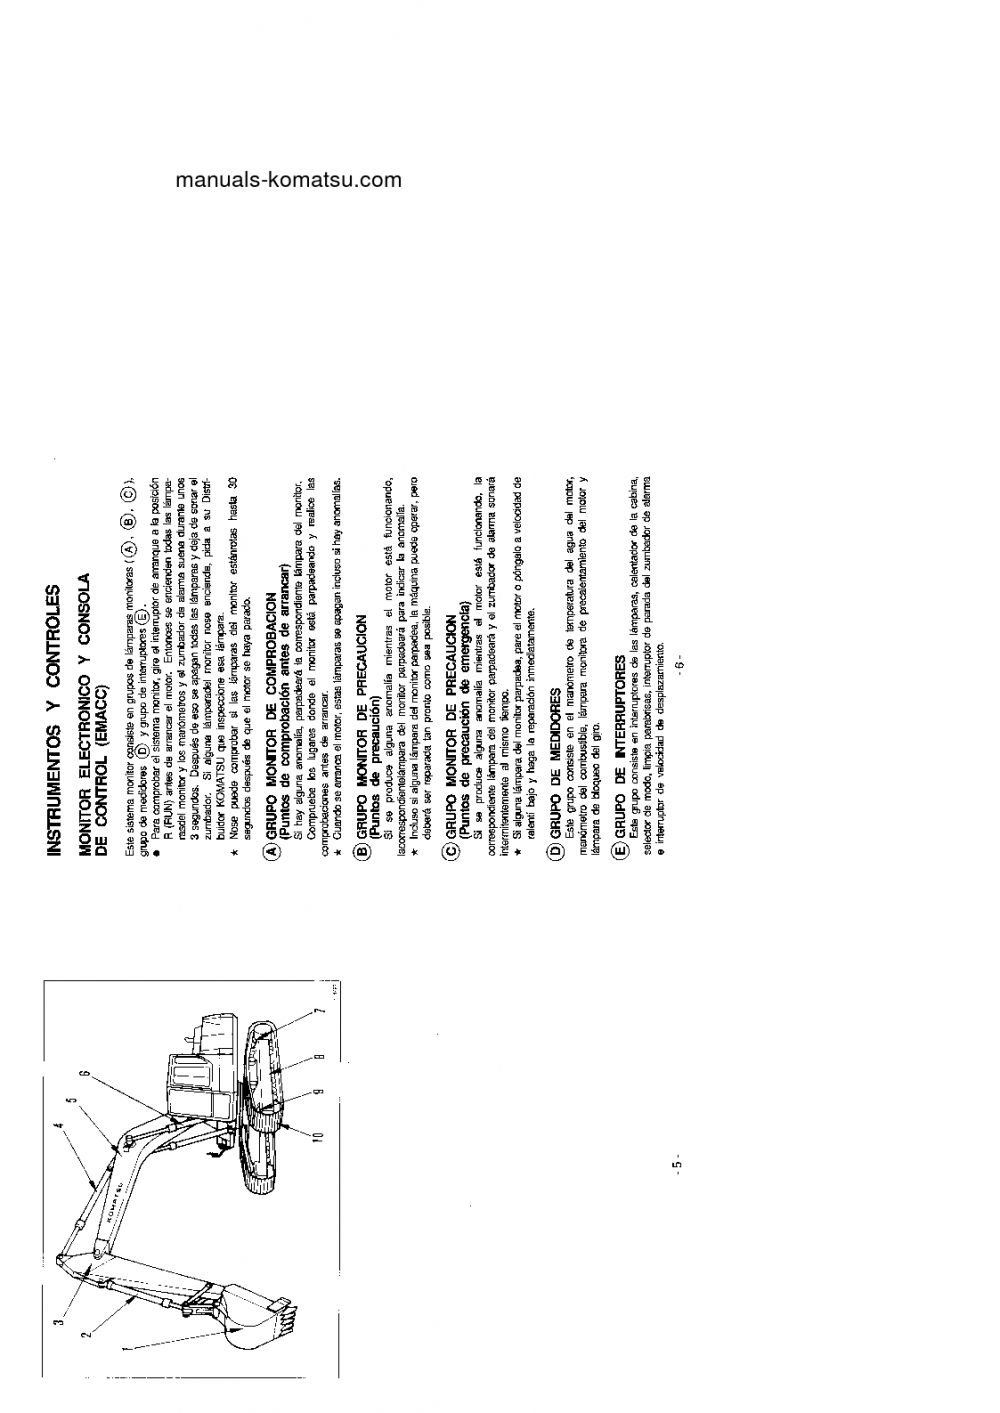 Protected: PC240LC-5(GBR)-K S/N K20001-UP Operation manual (Spanish)